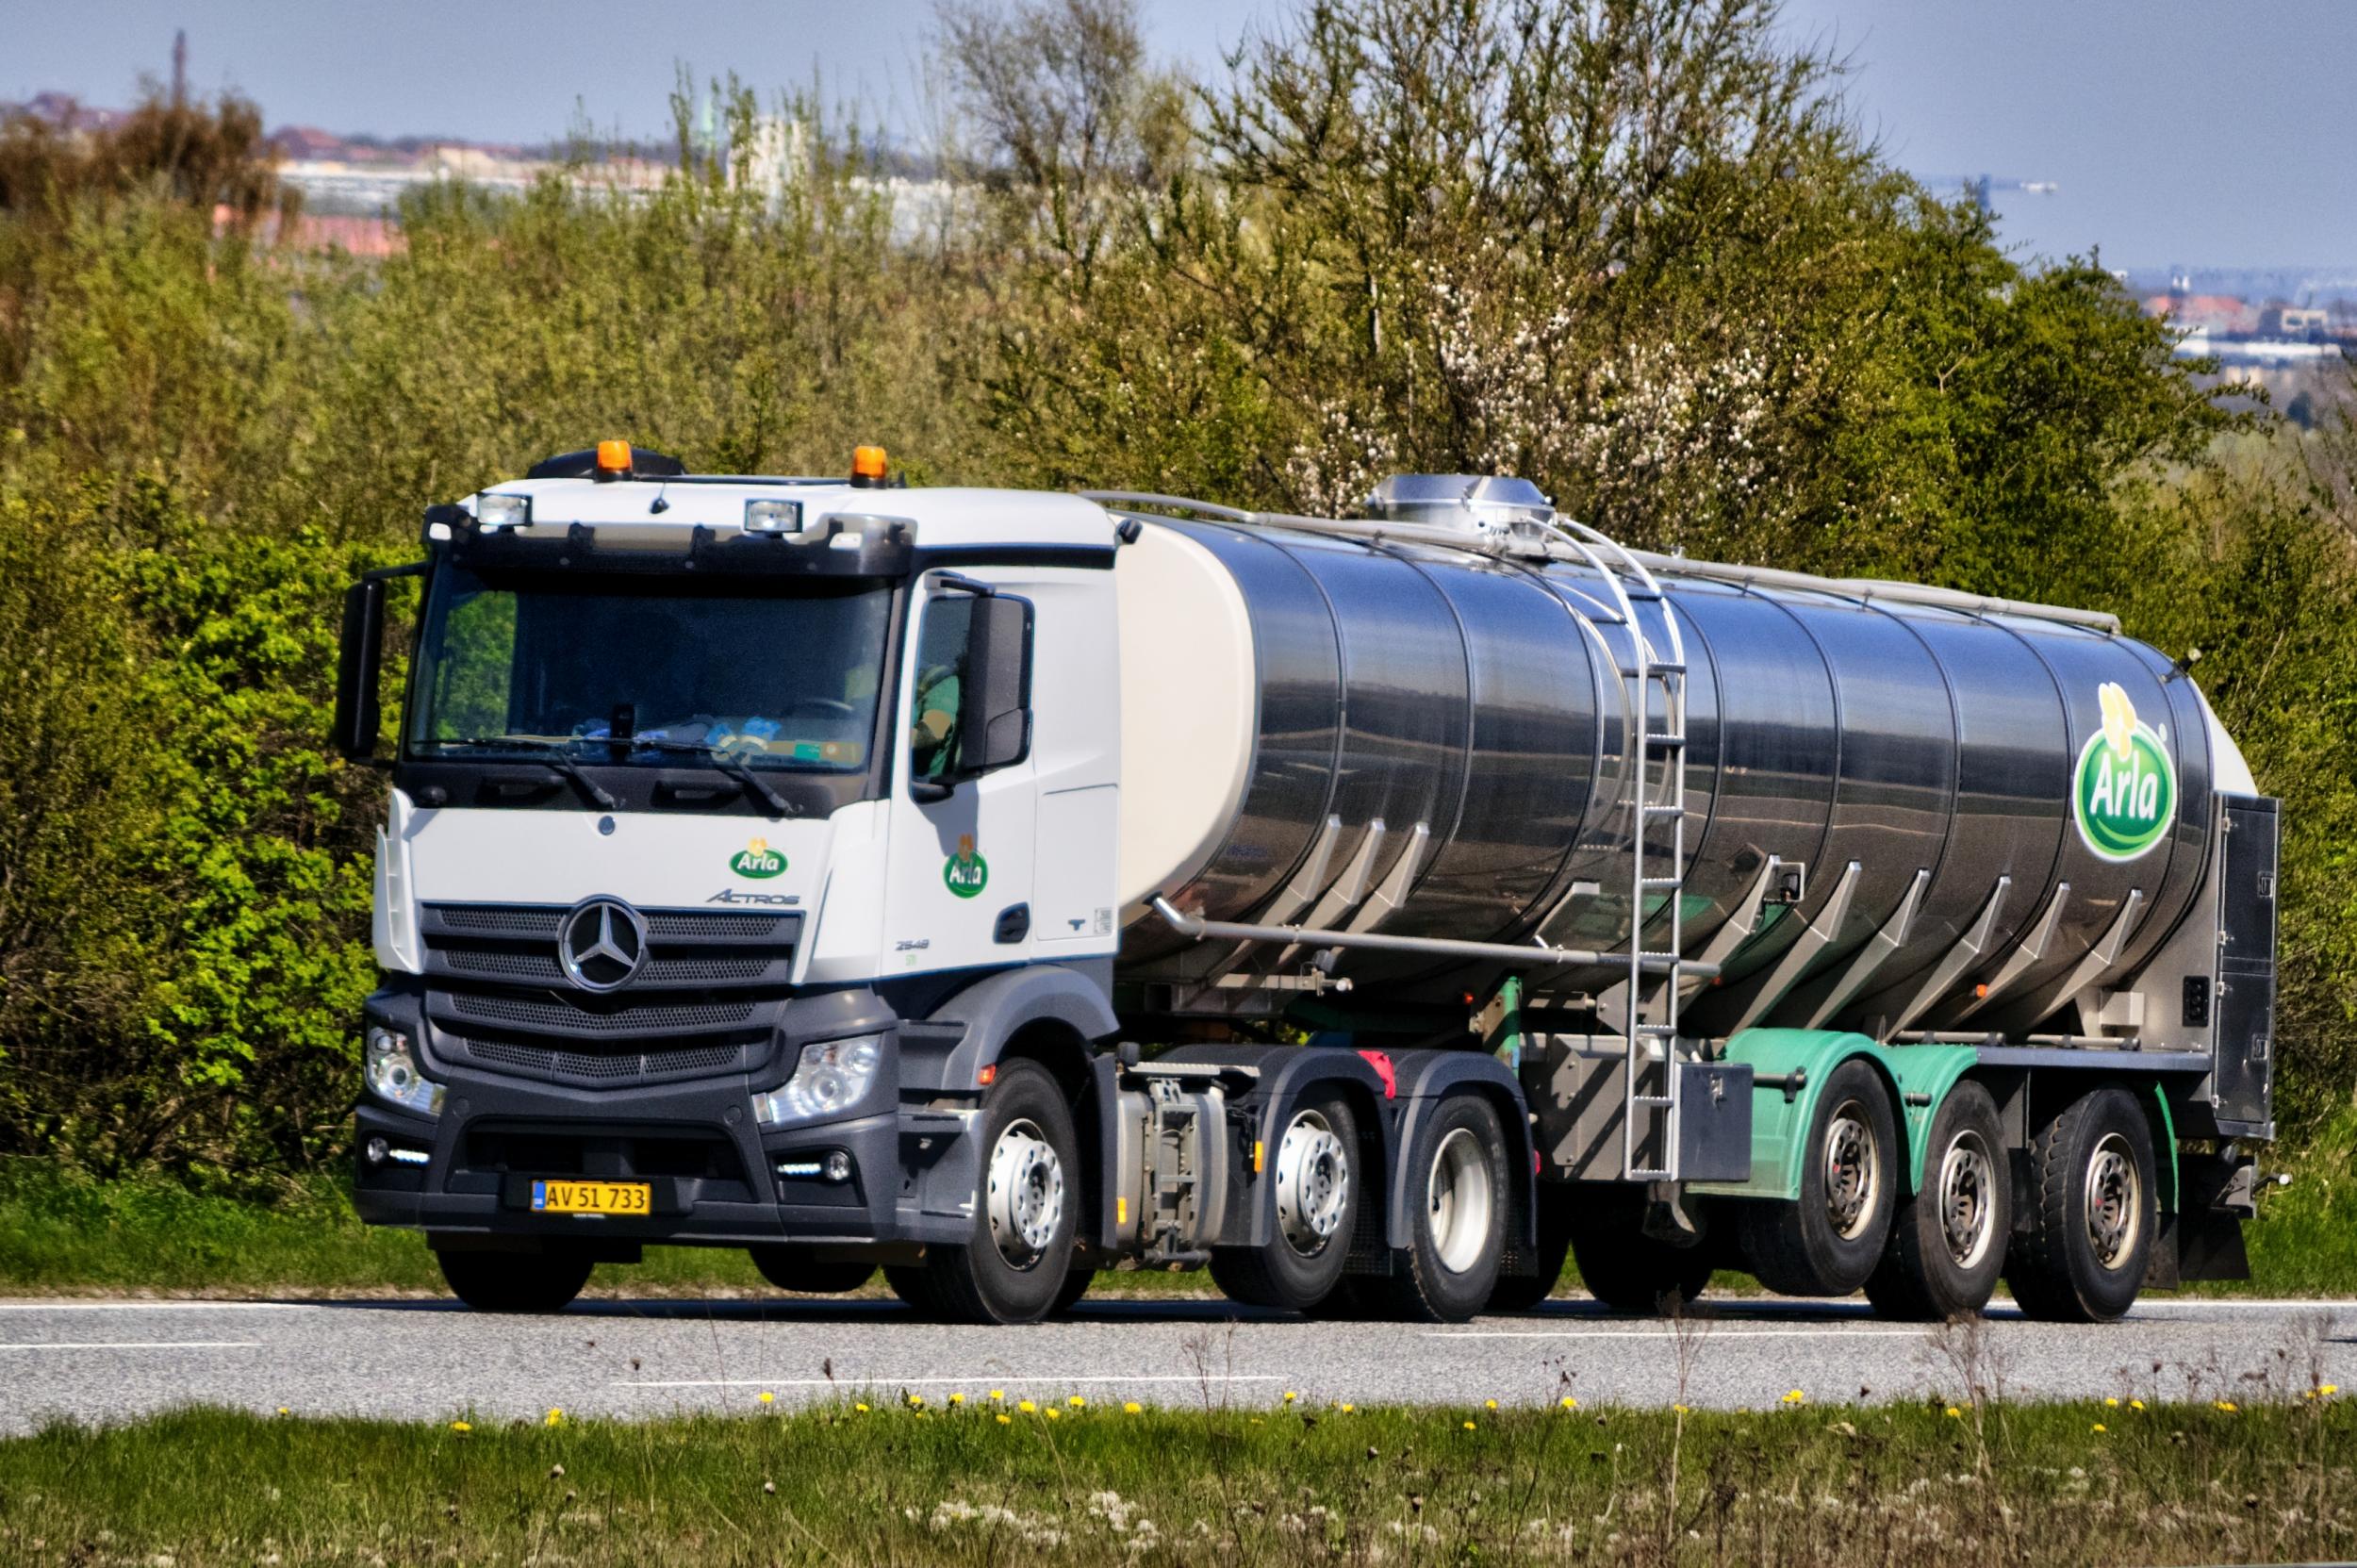 Stock image of a milk tanker.